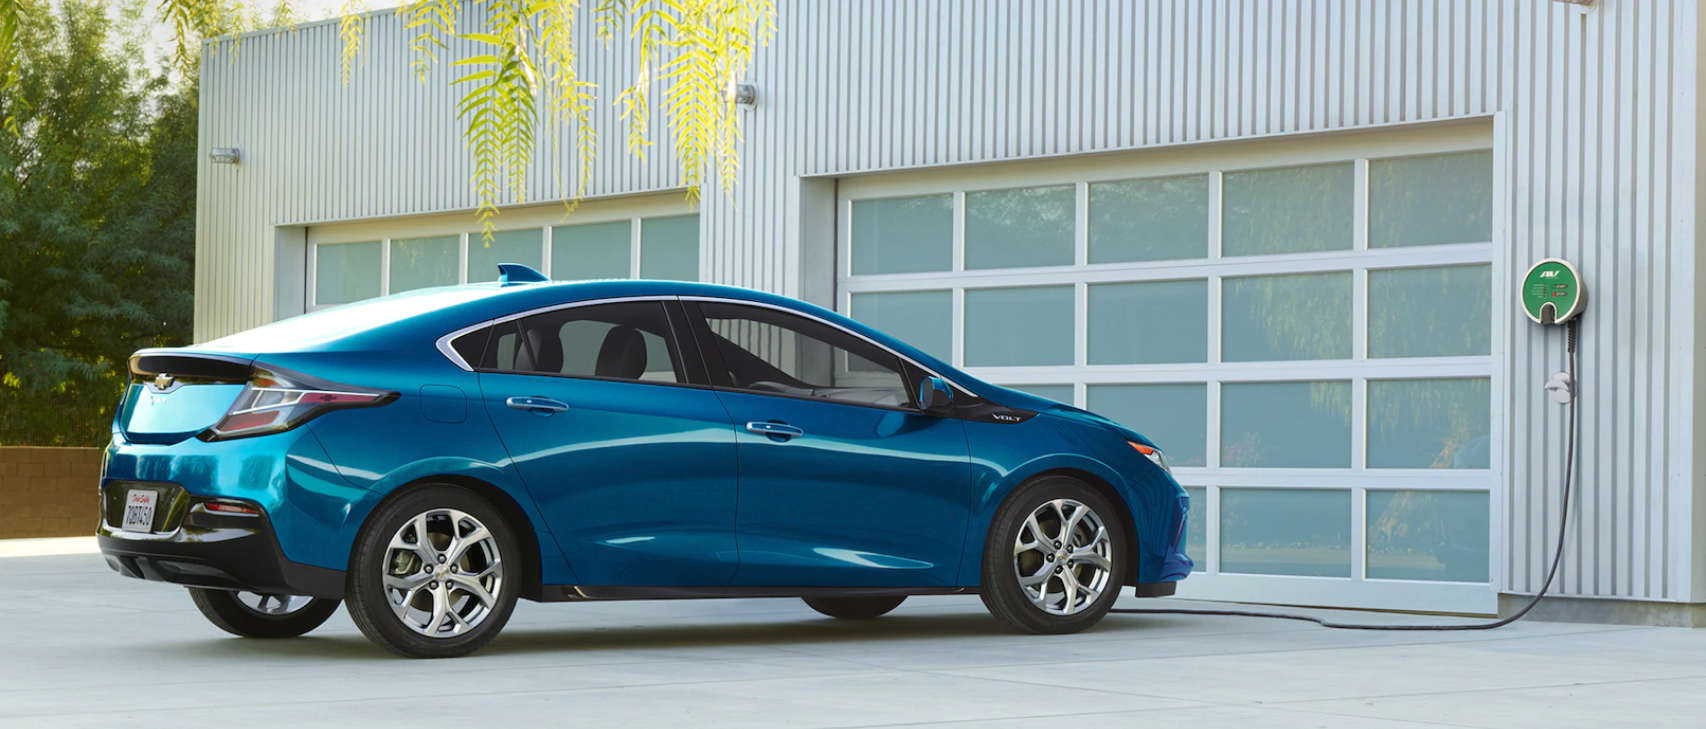 2019 Chevrolet Volt Model Overview | Crystal Lake IL | Cary